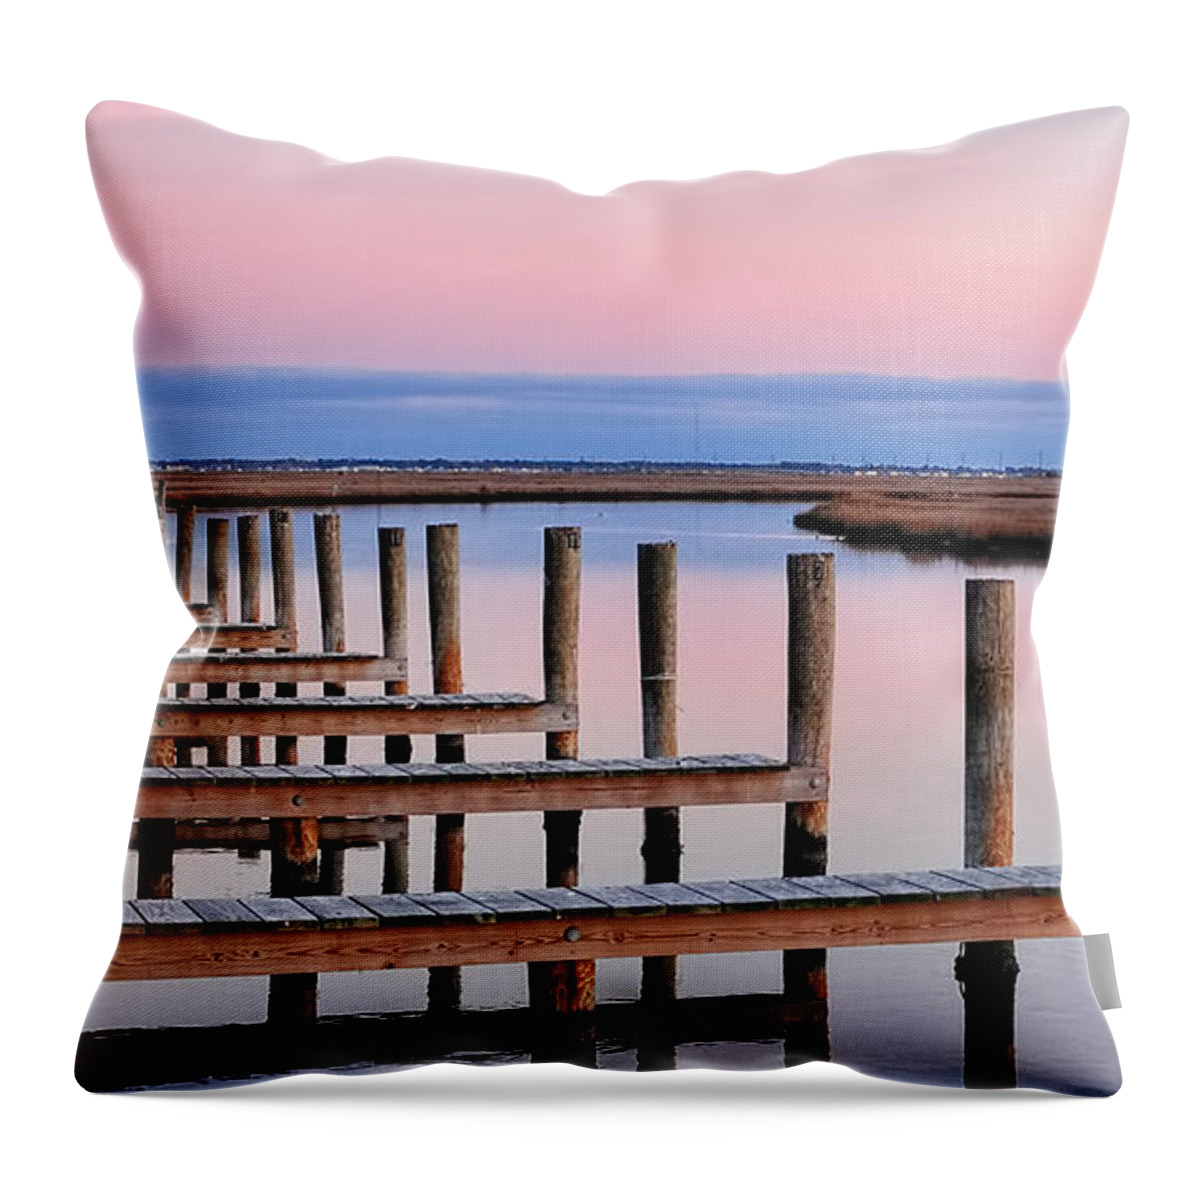 Docks Throw Pillow featuring the photograph Eastern Shore On The Docks by Lara Ellis